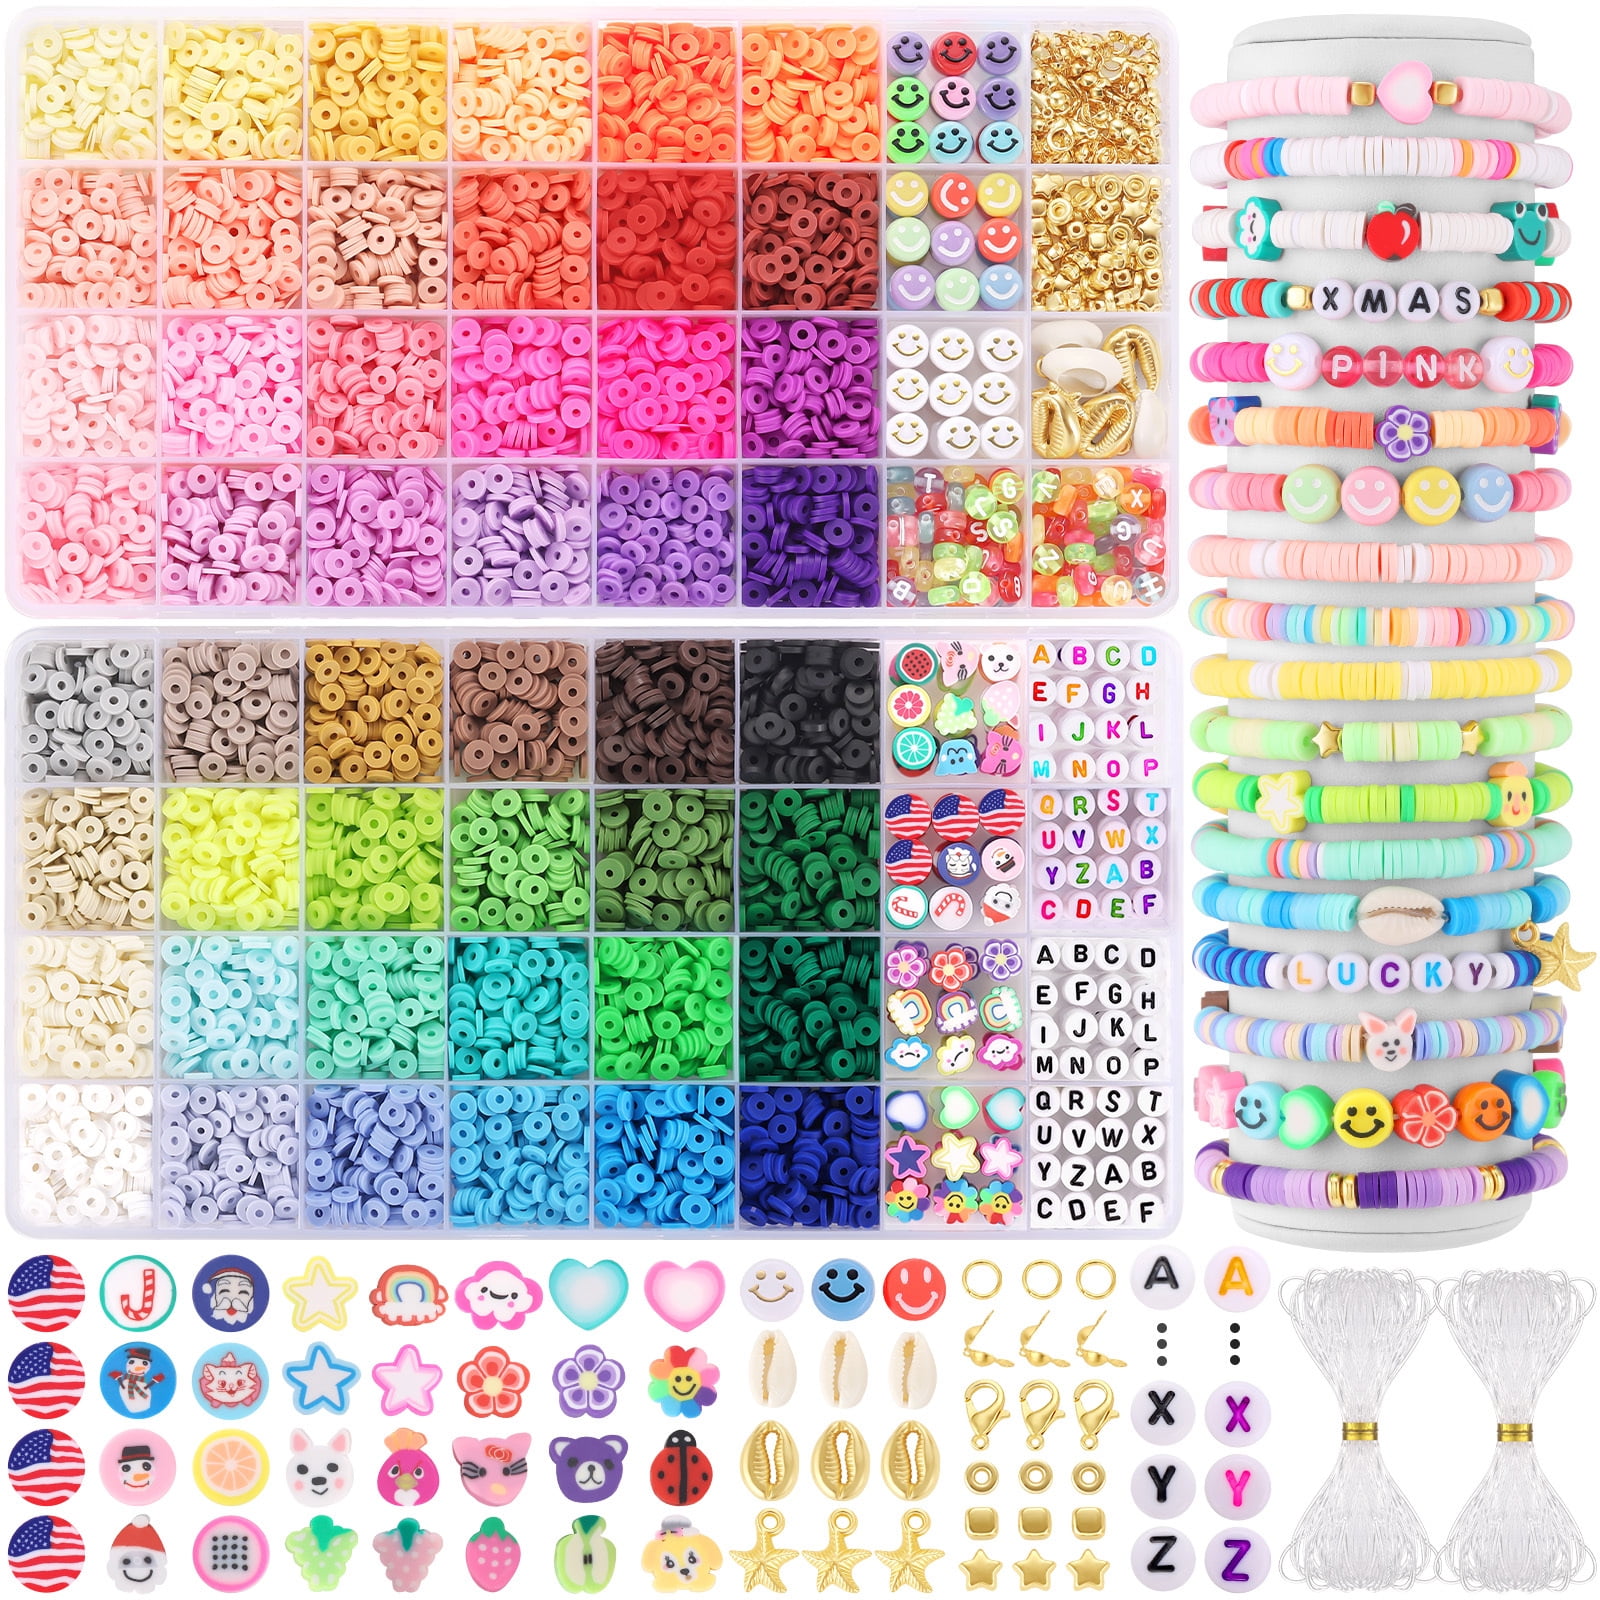  TOOPNK Clay Bead Bracelet Kit Clay Beads, 6000pcs 48 Colours  Styles Jewelry Making Kit for Crafting and Friendship, Bracelet Making Kit  Suitable for Teen Girls : Arts, Crafts & Sewing